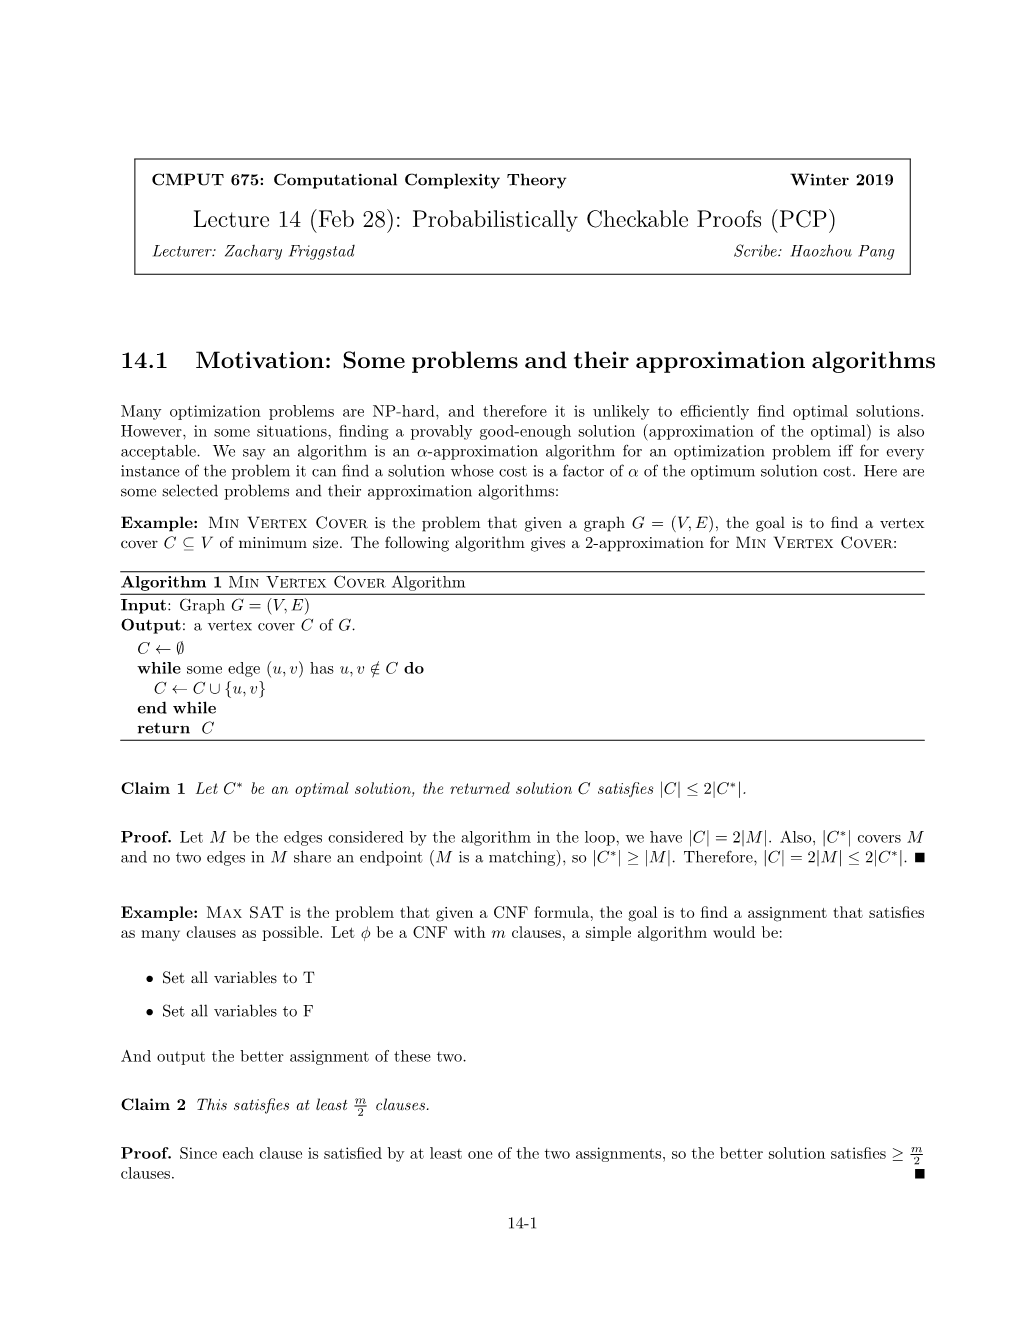 Lecture 14 (Feb 28): Probabilistically Checkable Proofs (PCP) 14.1 Motivation: Some Problems and Their Approximation Algorithms